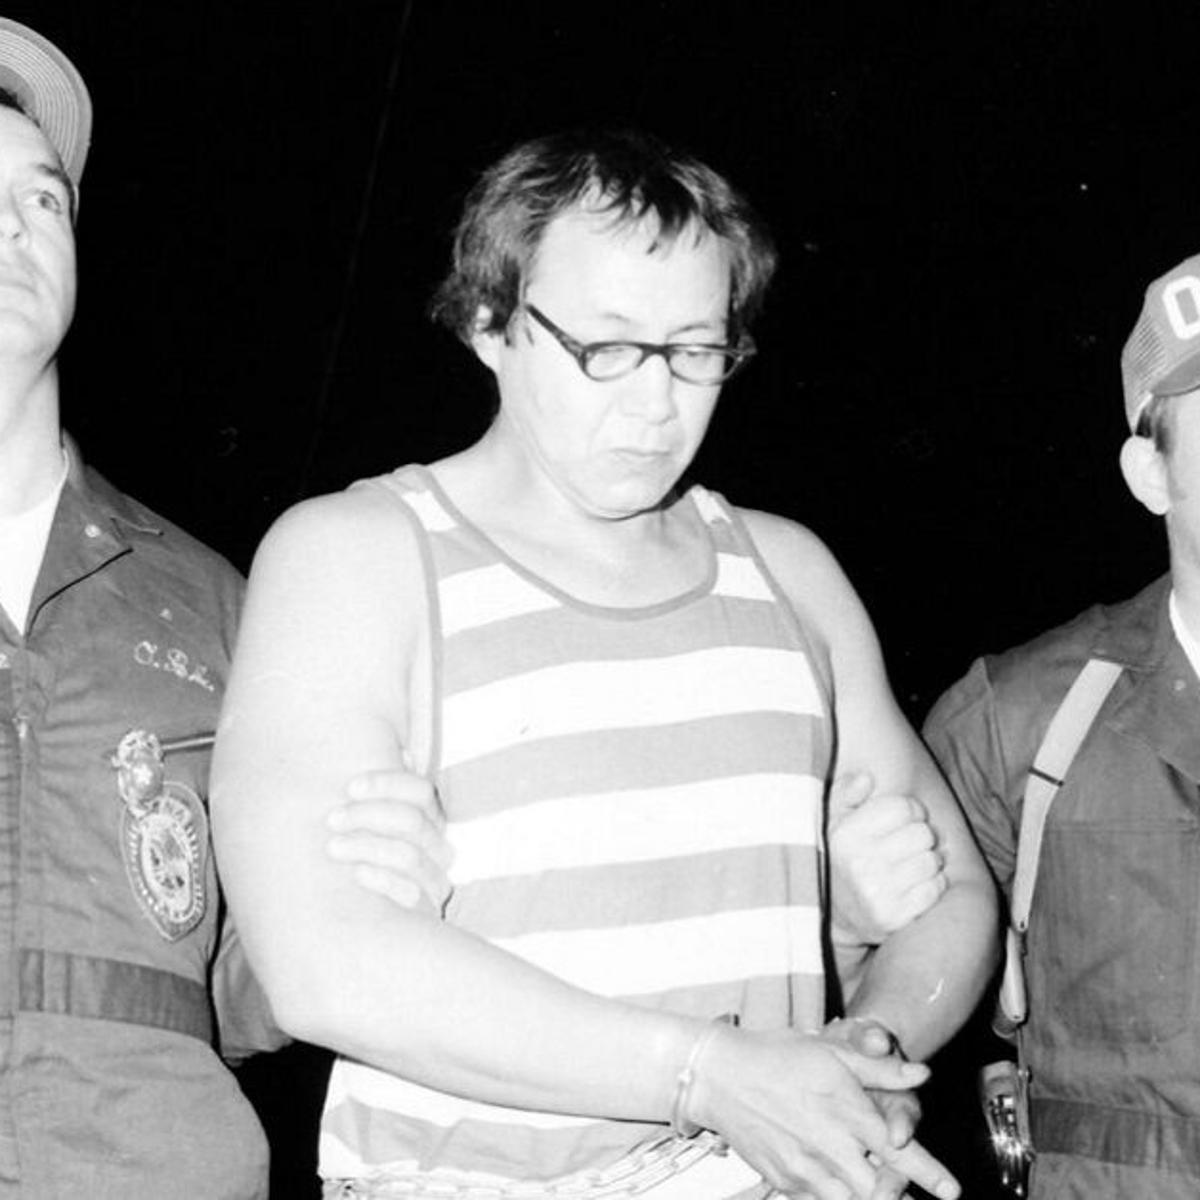 DNA points to longtime primary suspect in 1977 Girl Scout slayings ...